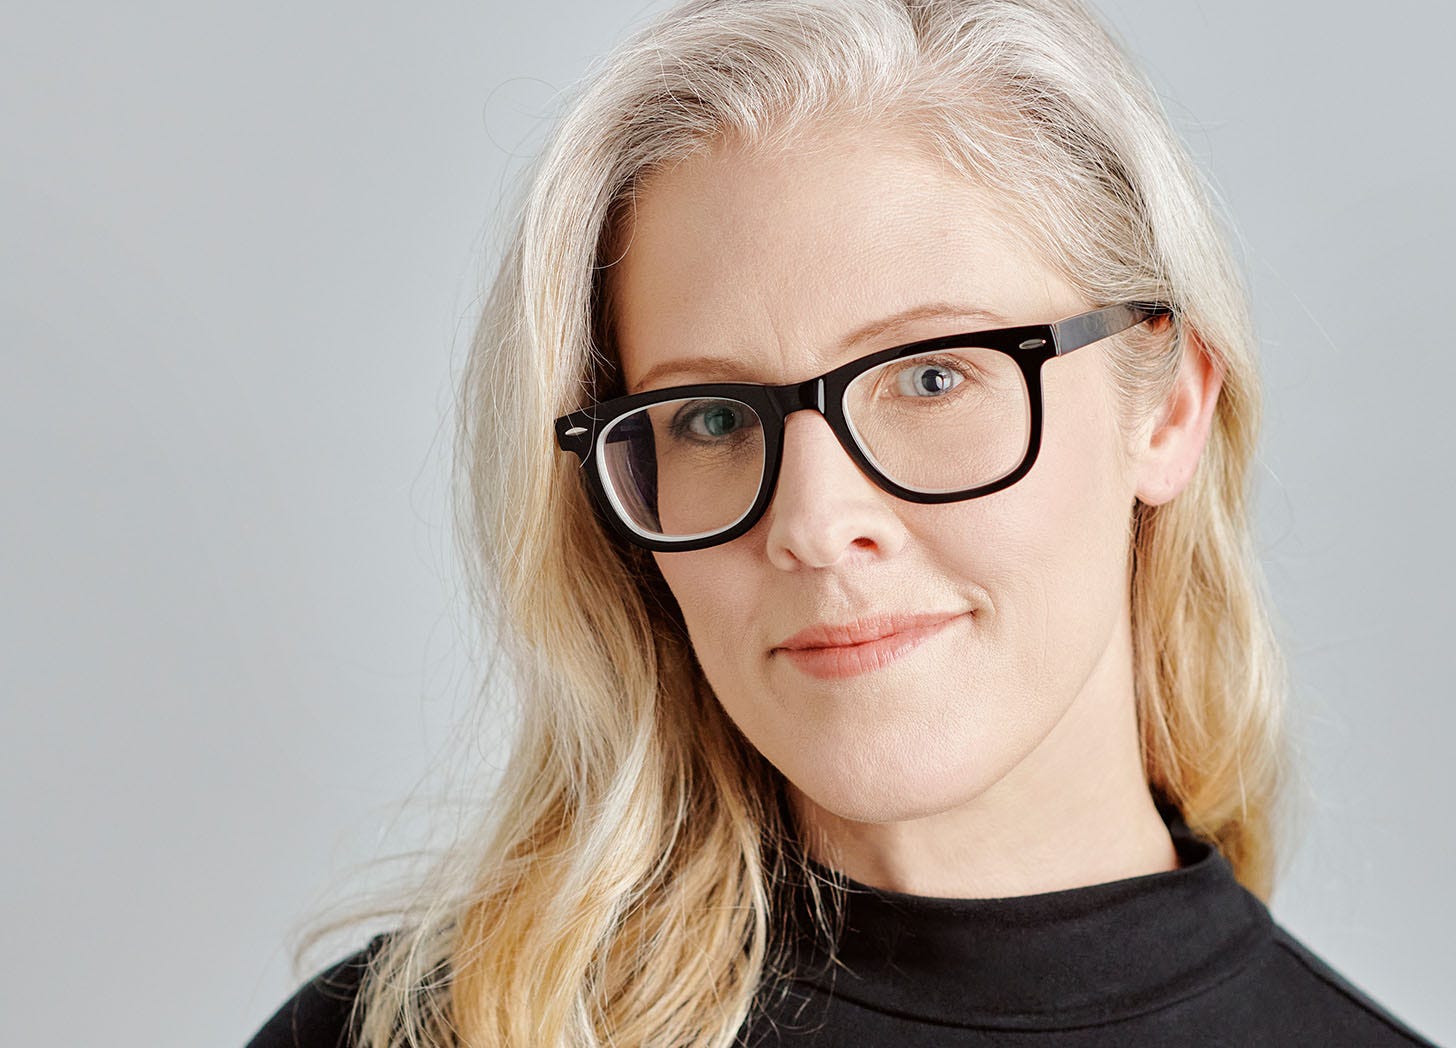 A headshot of NBC News journalist Brandy Zadrozny, who has long blonde hair and fantastic black-rimmed glasses